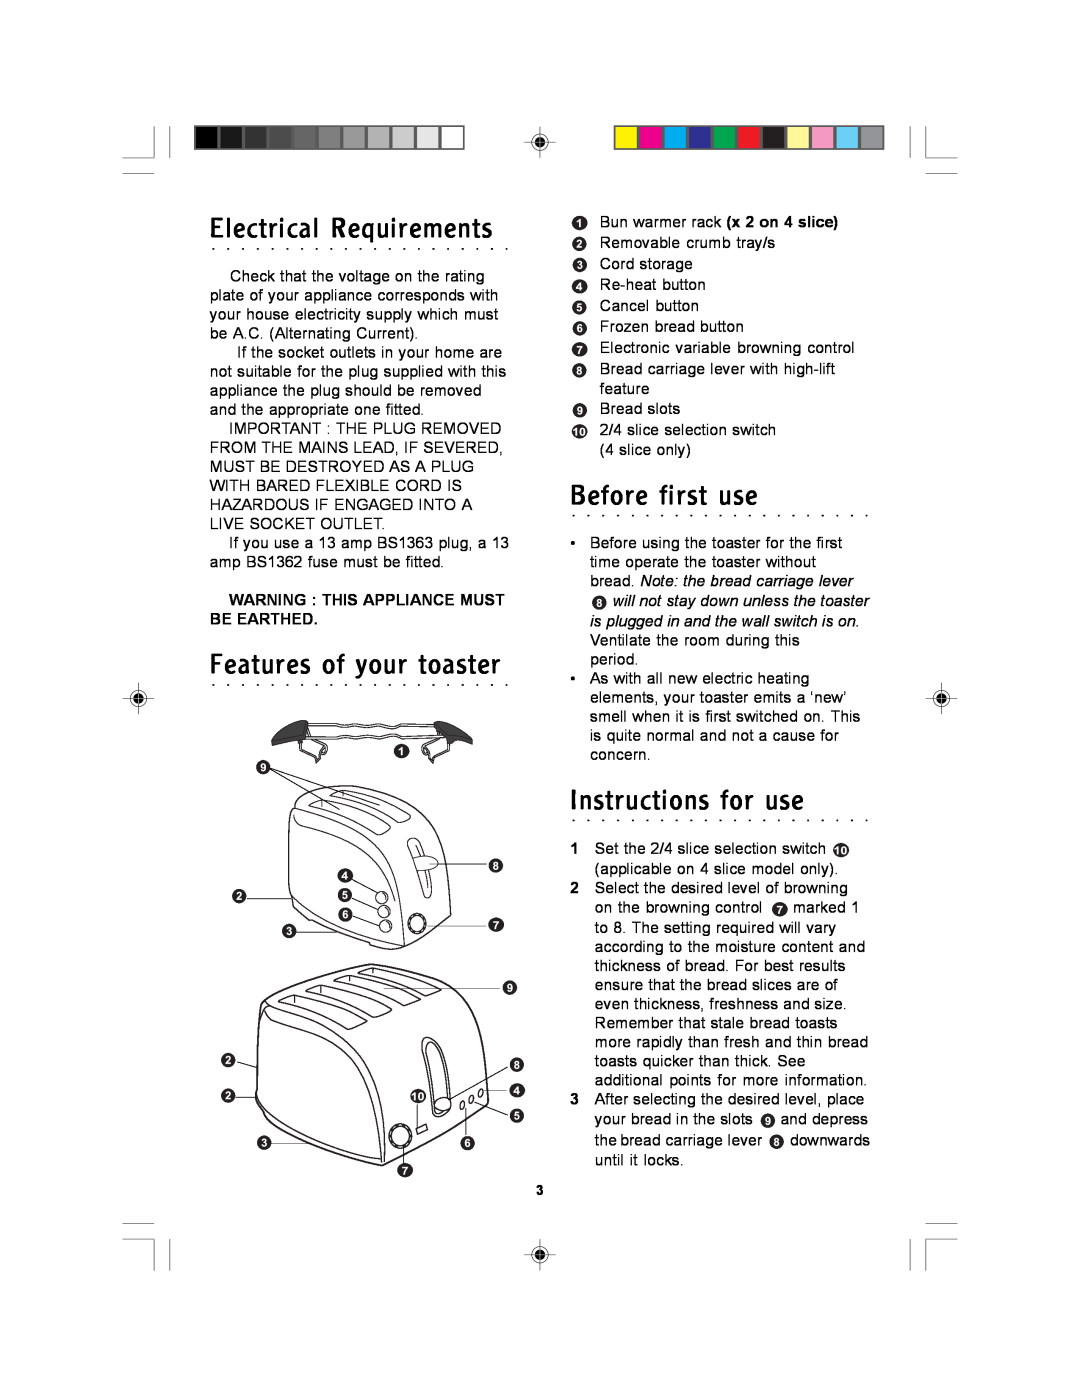 Morphy Richards contemporary Electrical Requirements, Features of your toaster, Before first use, Instructions for use 